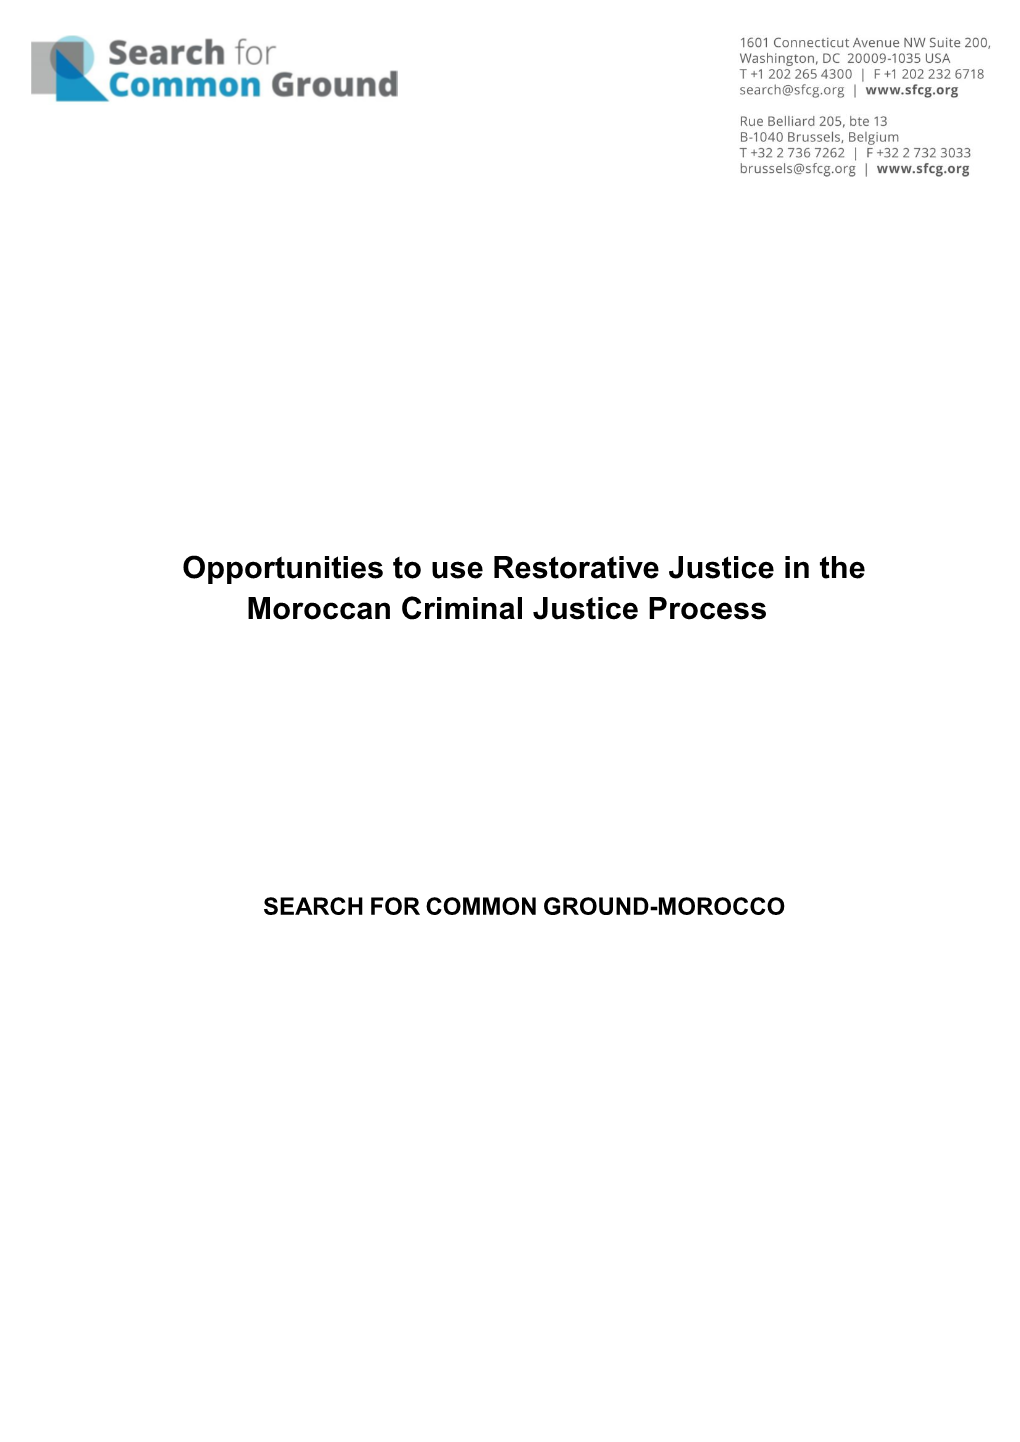 Opportunities to Use Restorative Justice in the Moroccan Criminal Justice Process